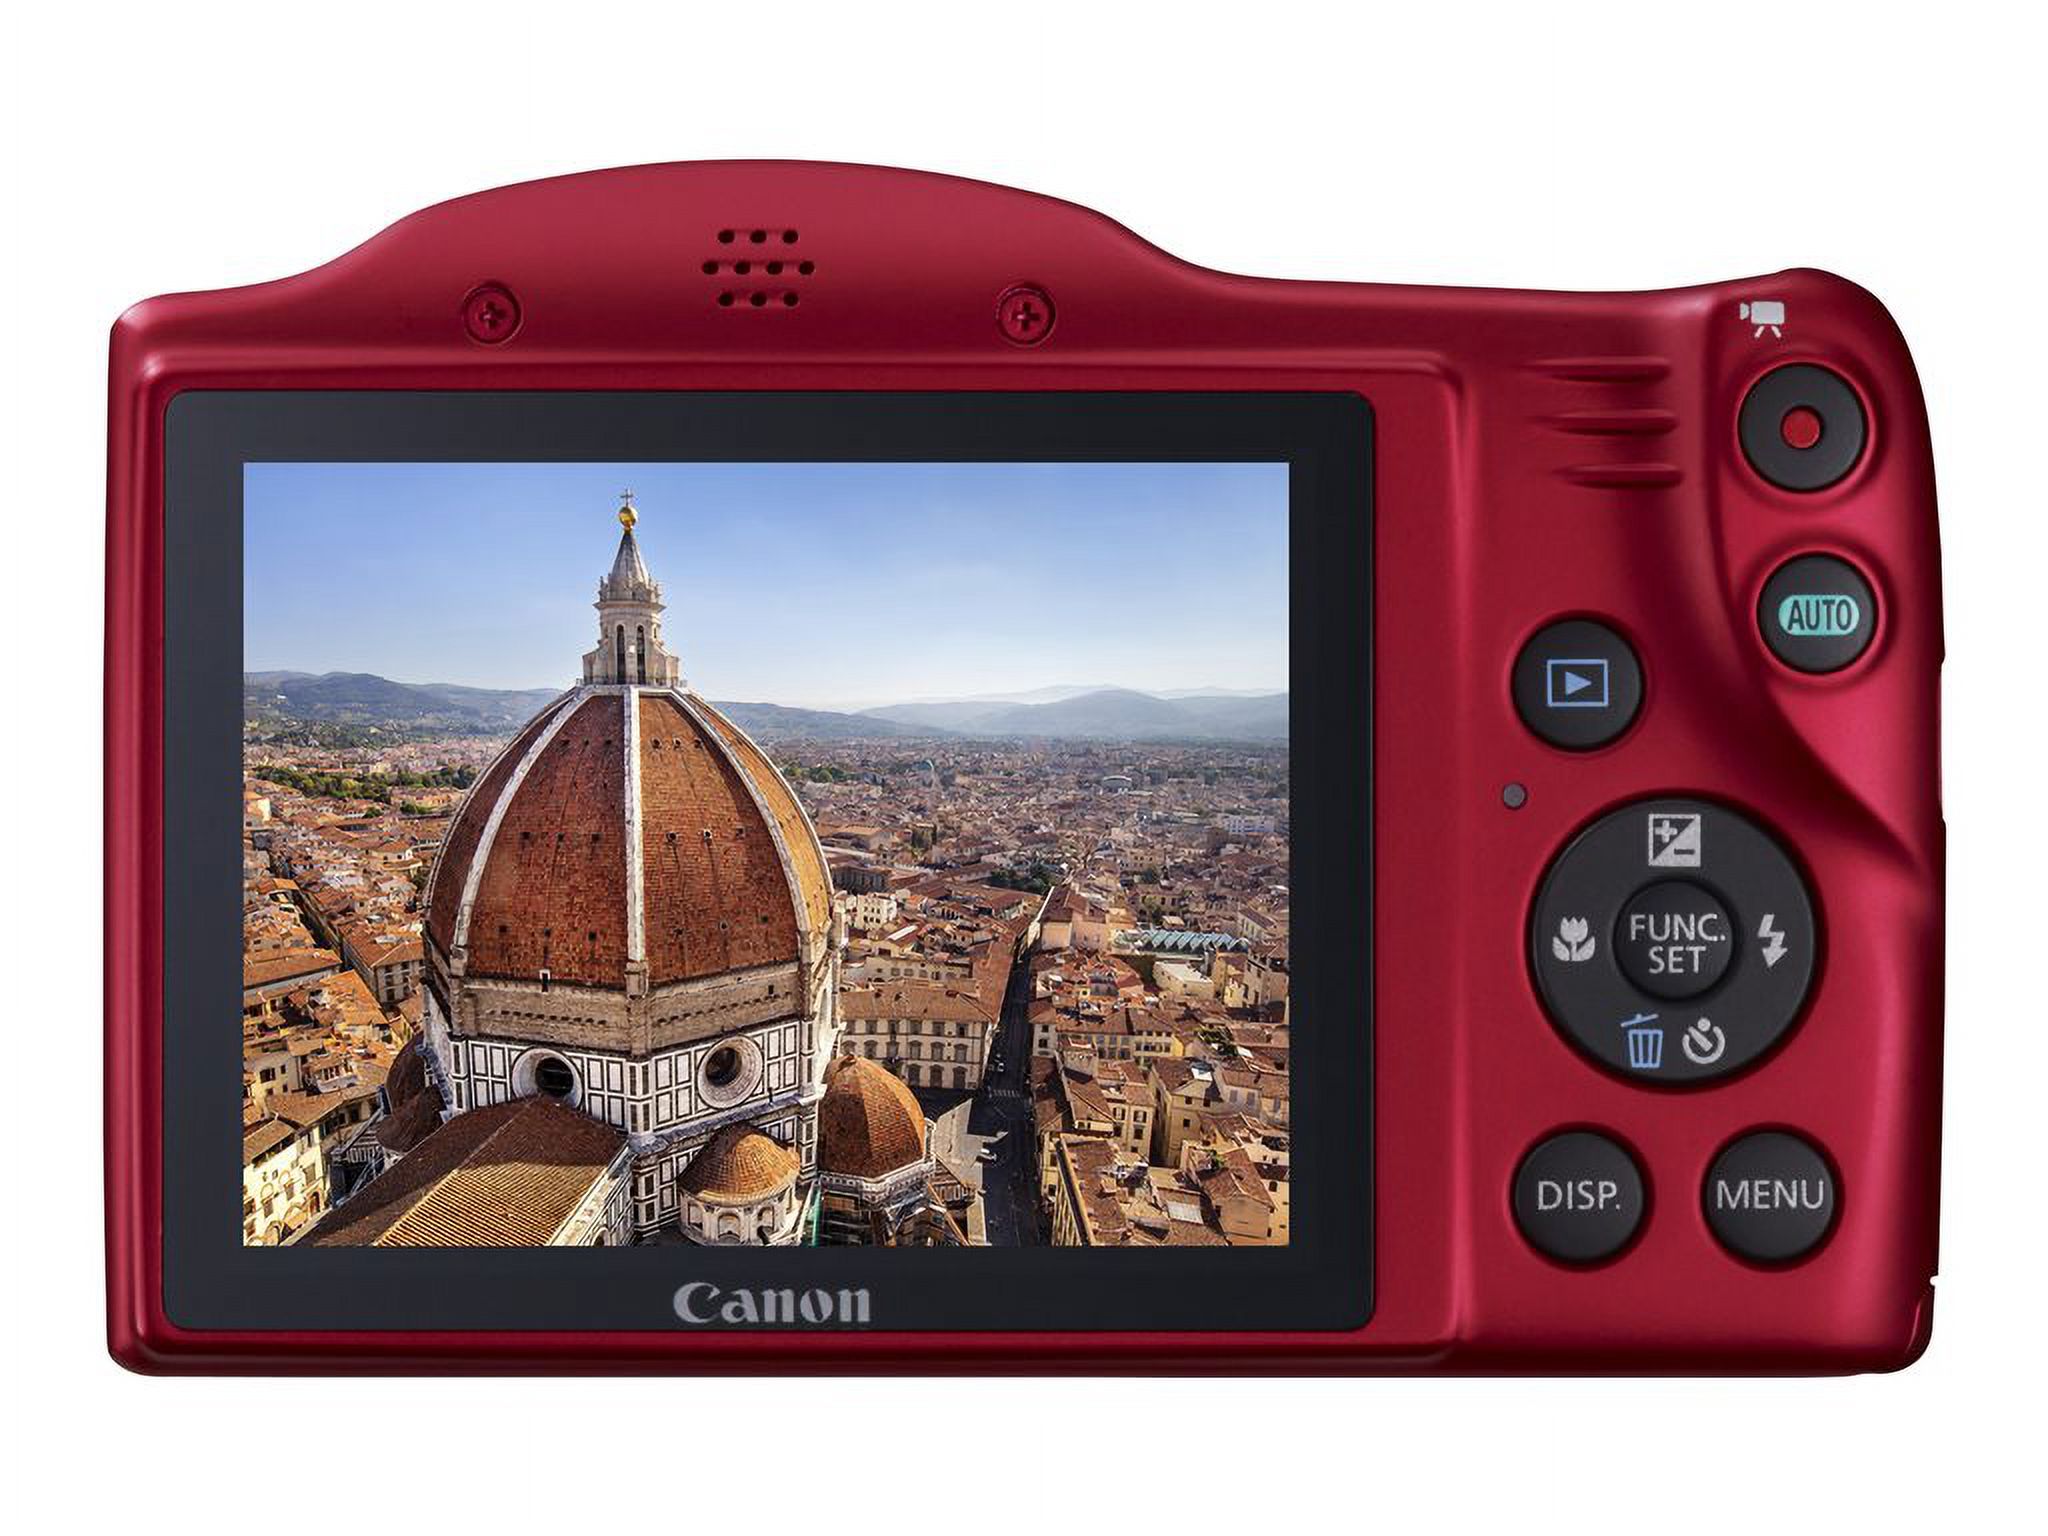 Canon PowerShot SX400 IS - Digital camera - High Definition - compact - 16.0 MP - 30 x optical zoom - red - image 12 of 72